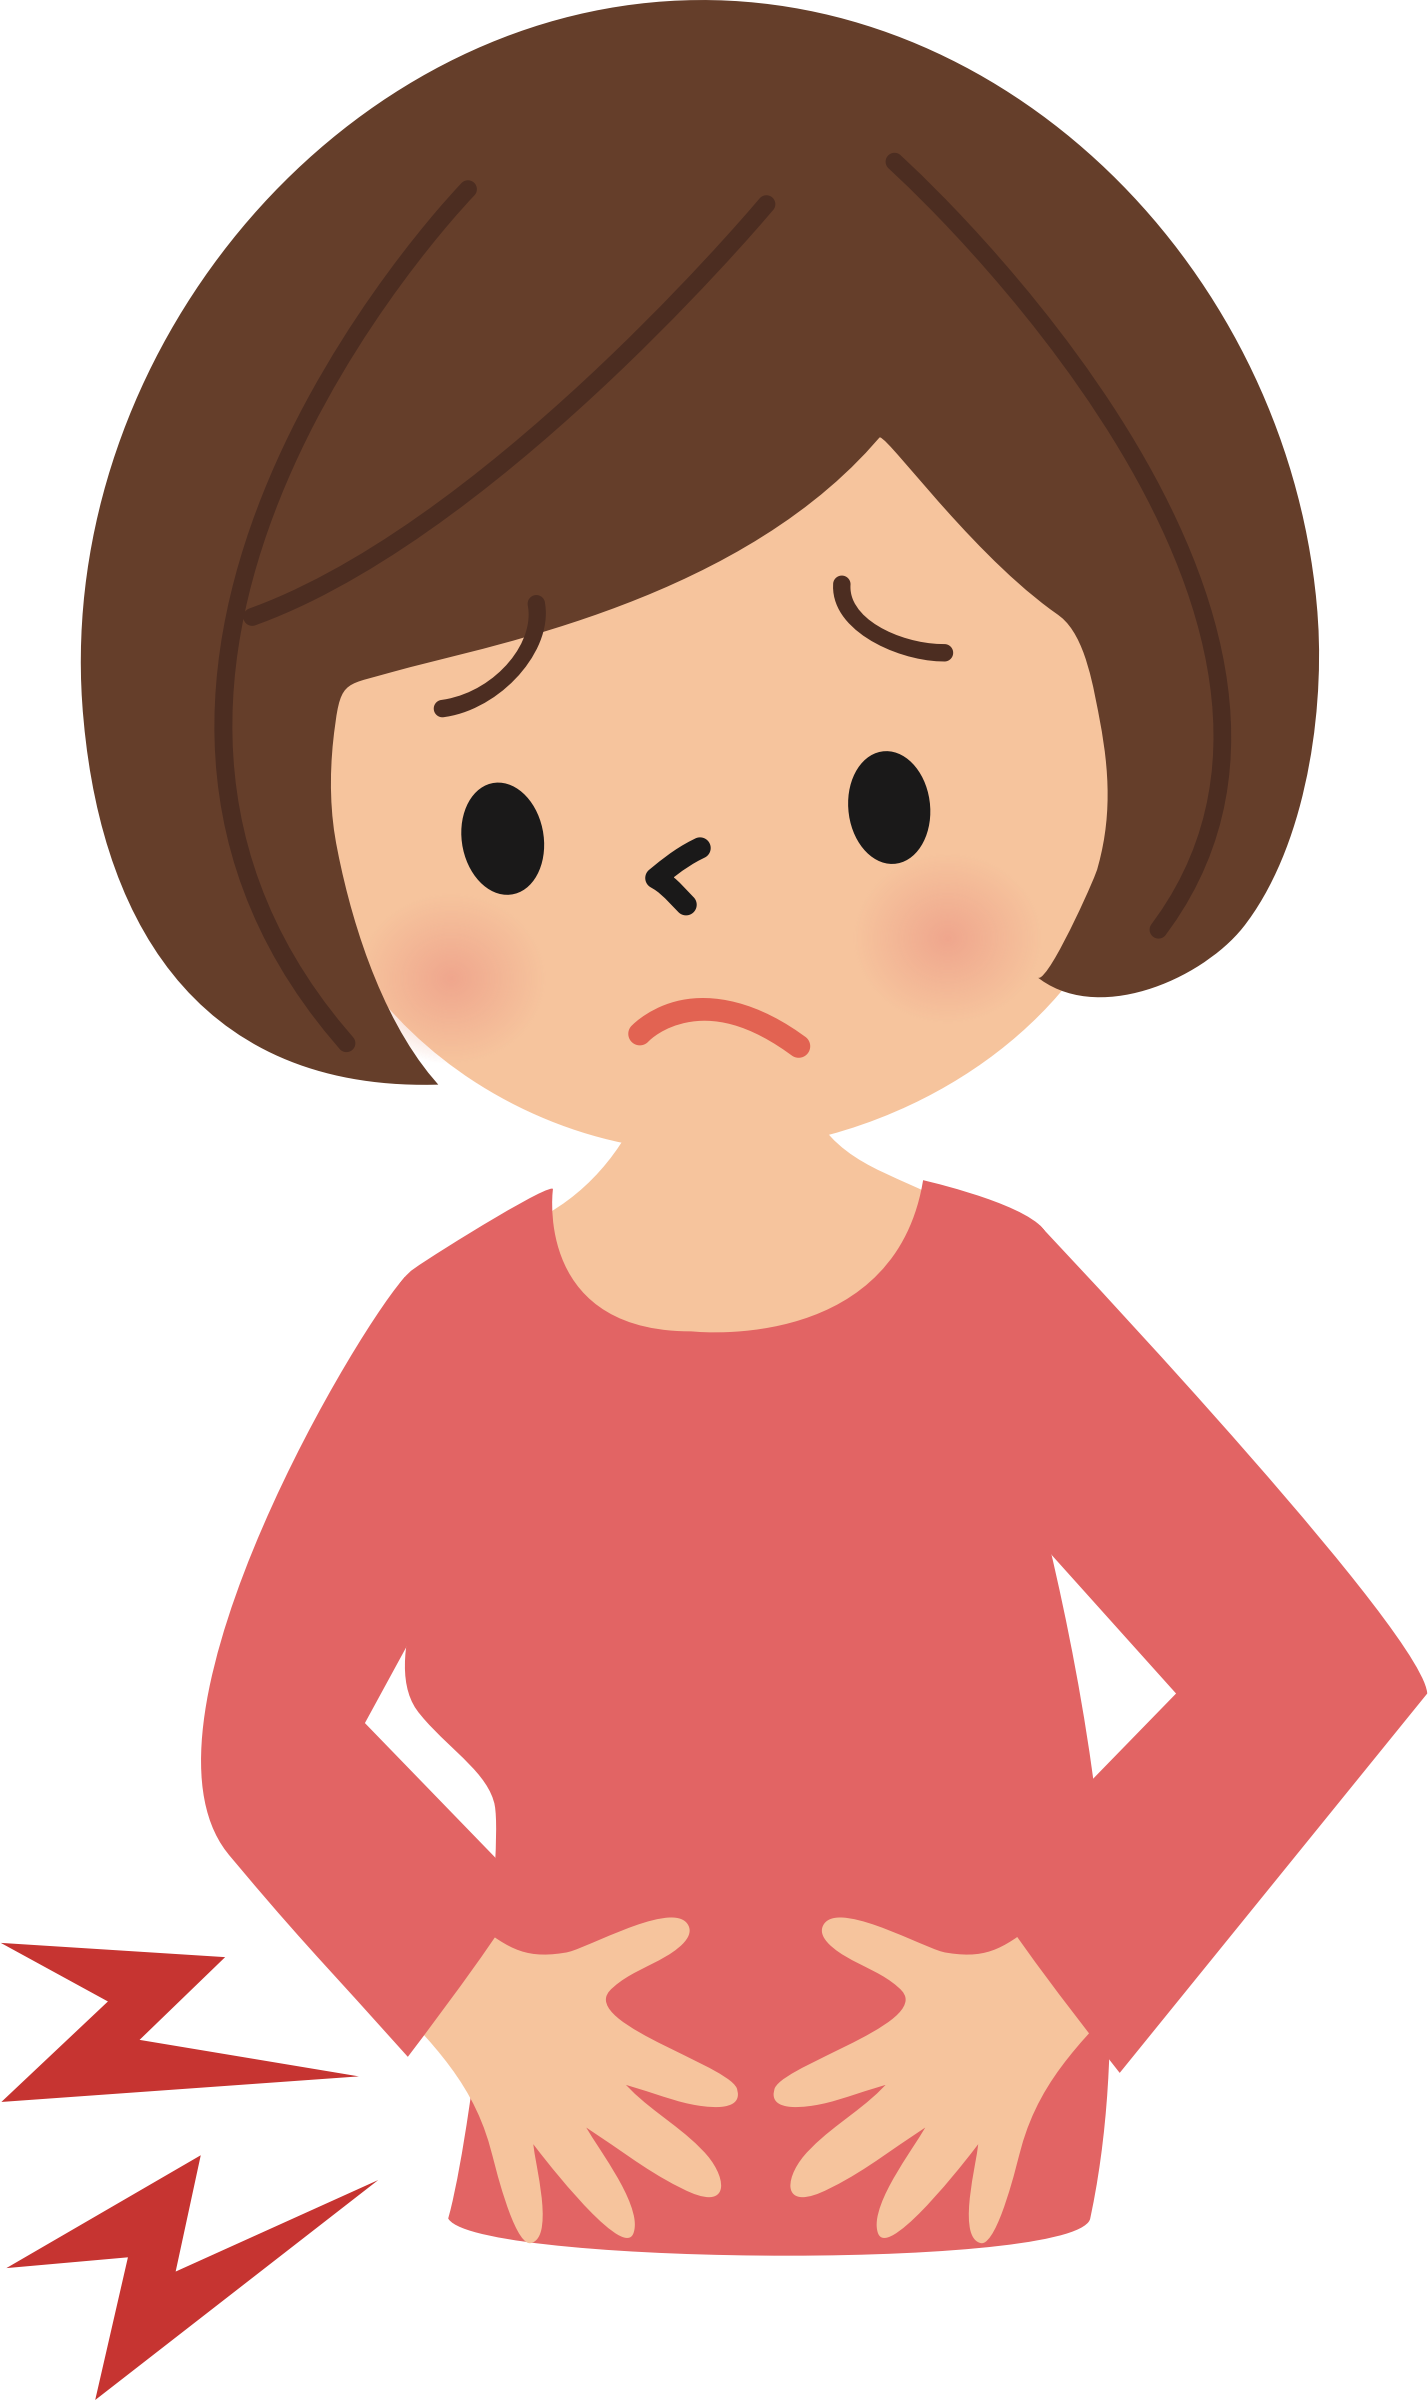 Download Stomach Ache PNG Download Free HQ PNG Image FreePNGImg.